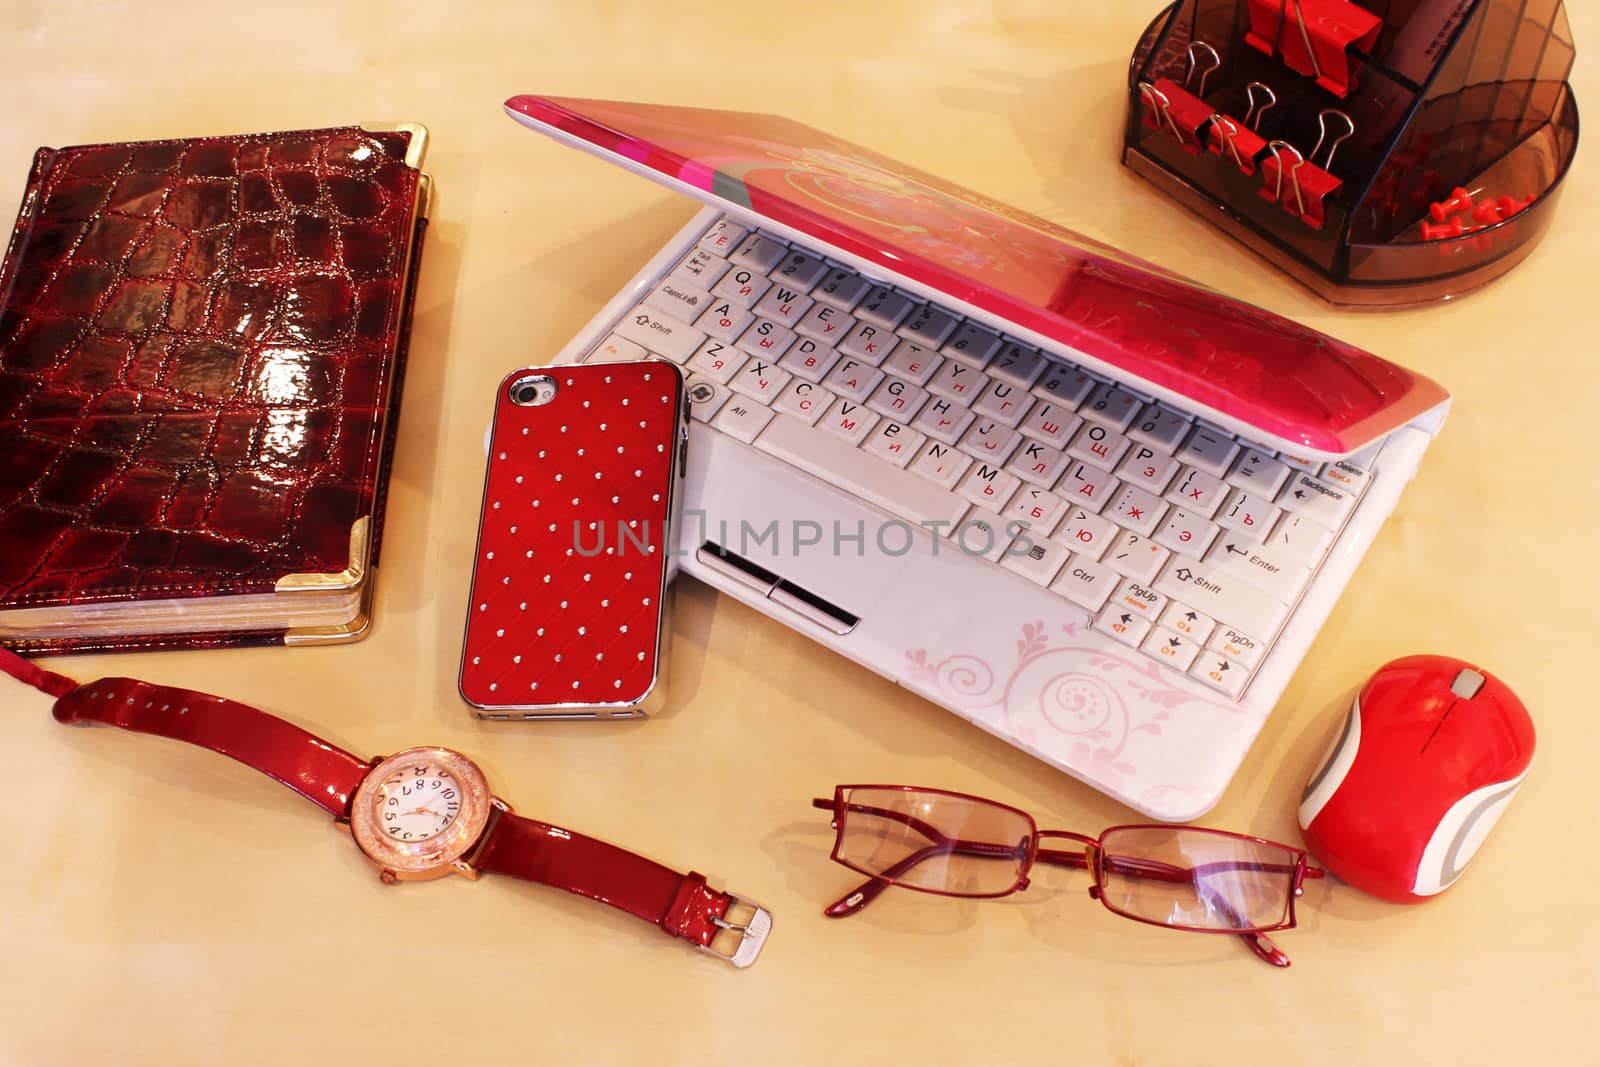 Stationery and business accessories in red color scheme